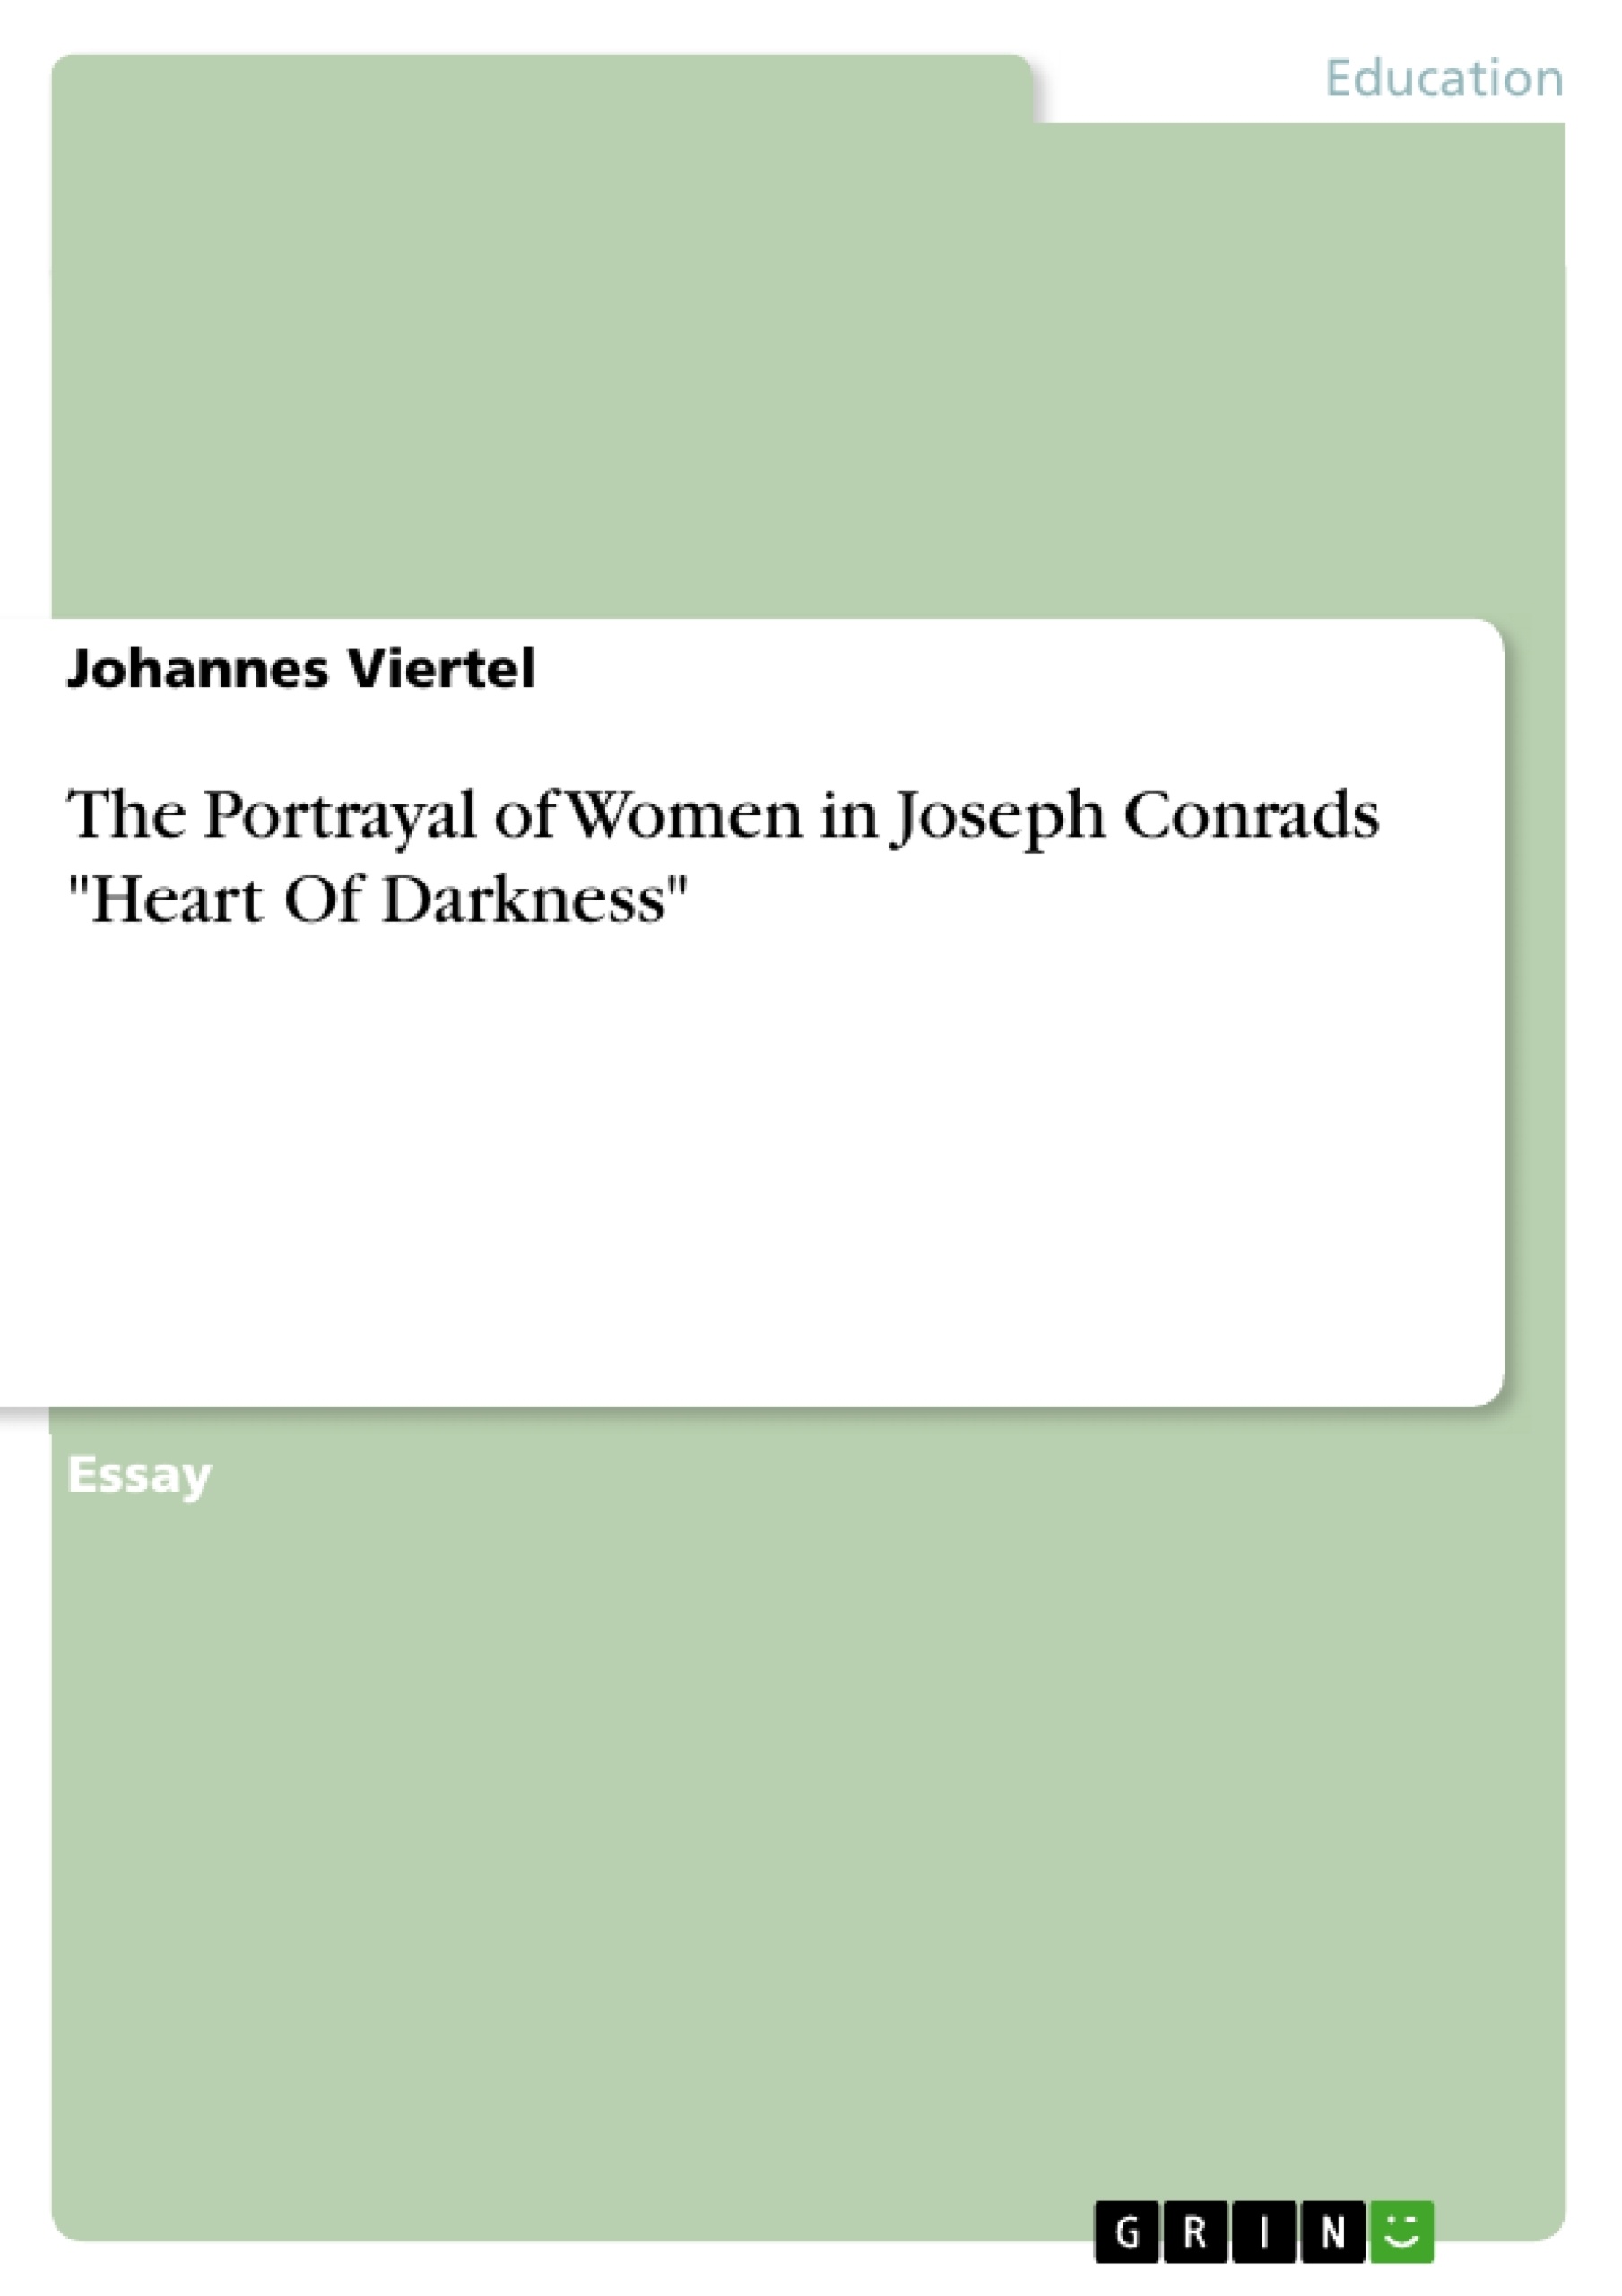 Título: The Portrayal of Women in Joseph Conrads "Heart Of Darkness"